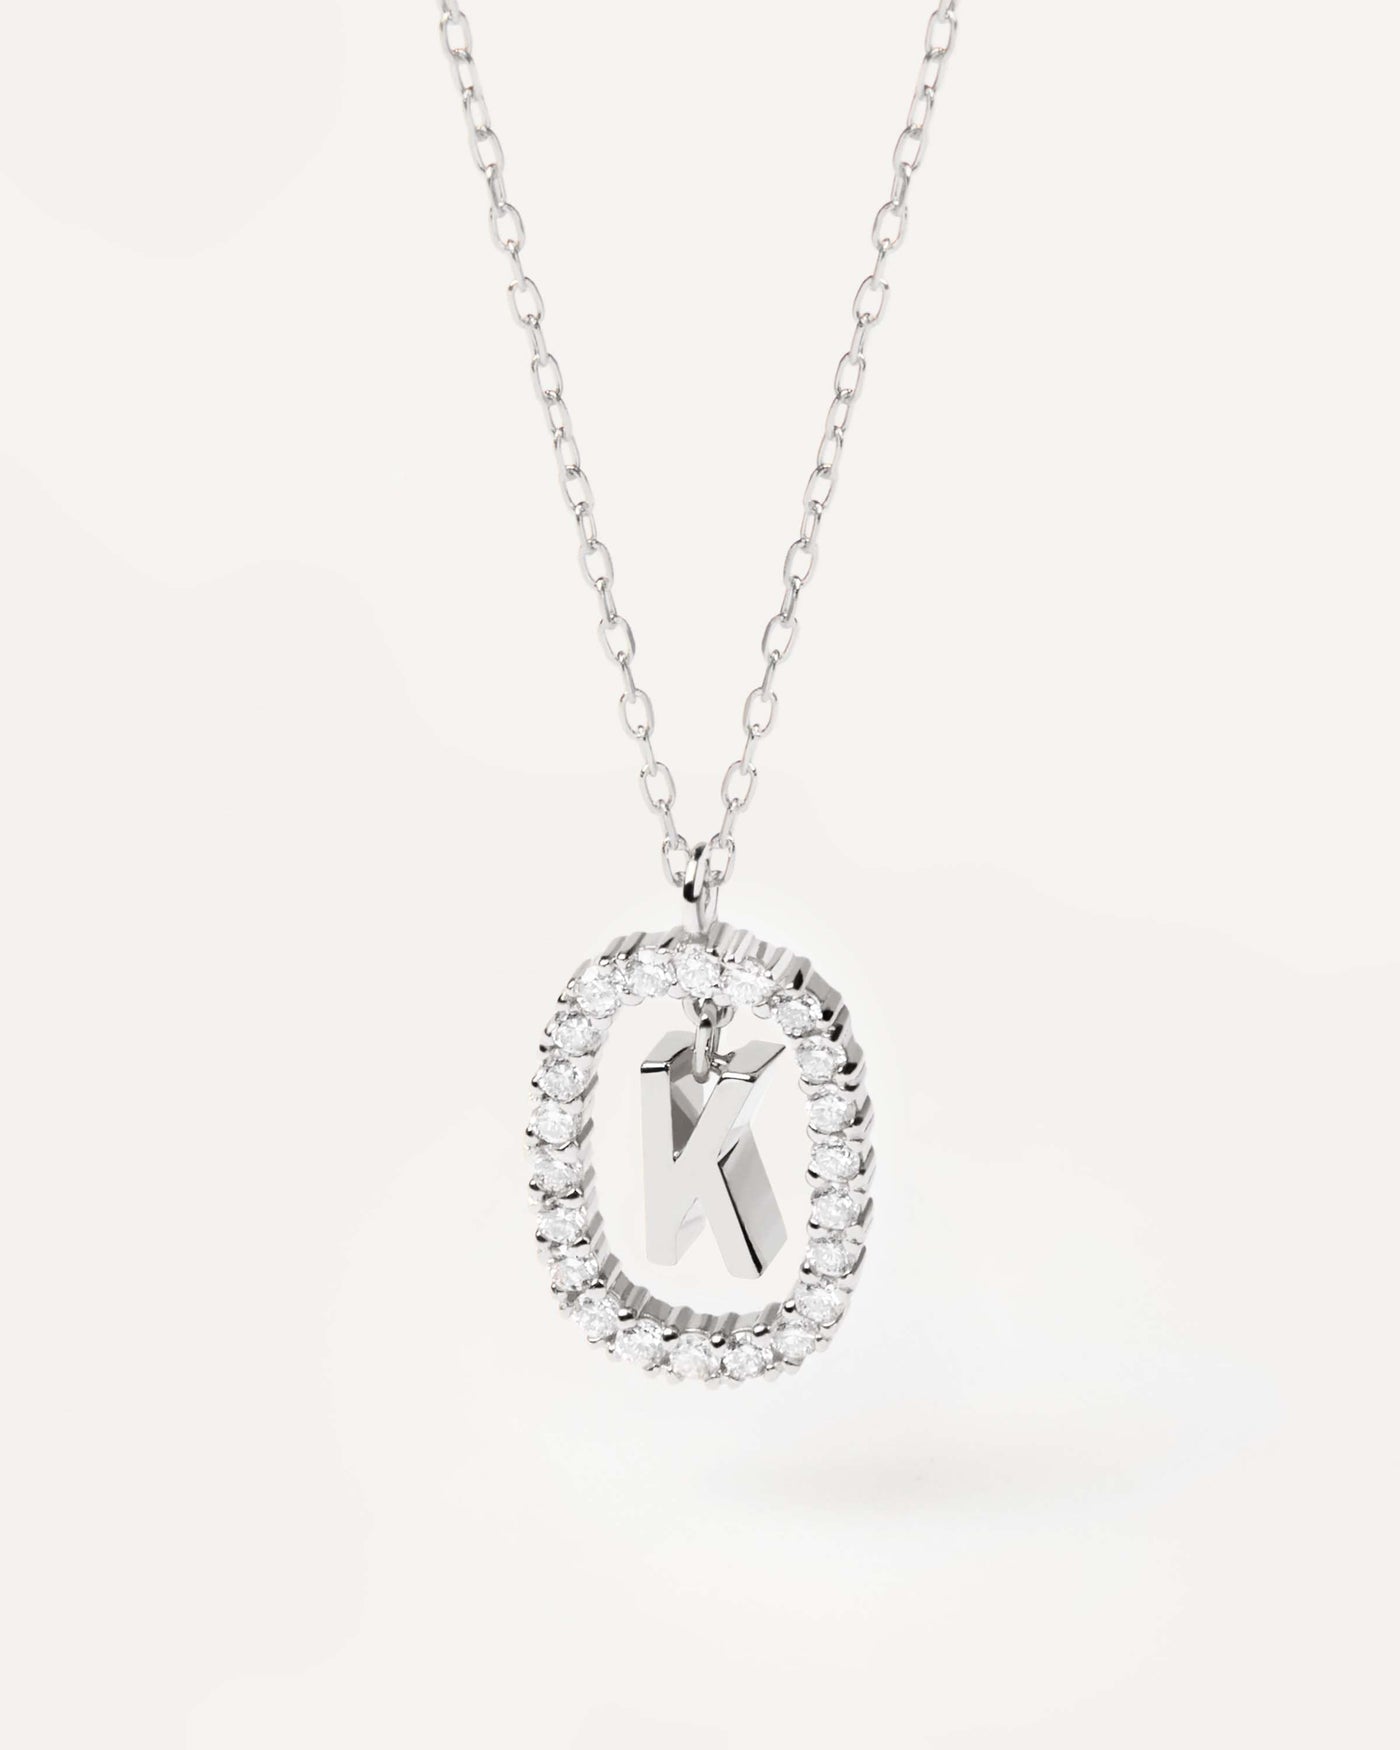 2023 Selection | Diamonds and White Gold Letter K Necklace. Initial K necklace in solid white gold, circled by 0.33 carats lab-grown diamonds. Get the latest arrival from PDPAOLA. Place your order safely and get this Best Seller. Free Shipping.